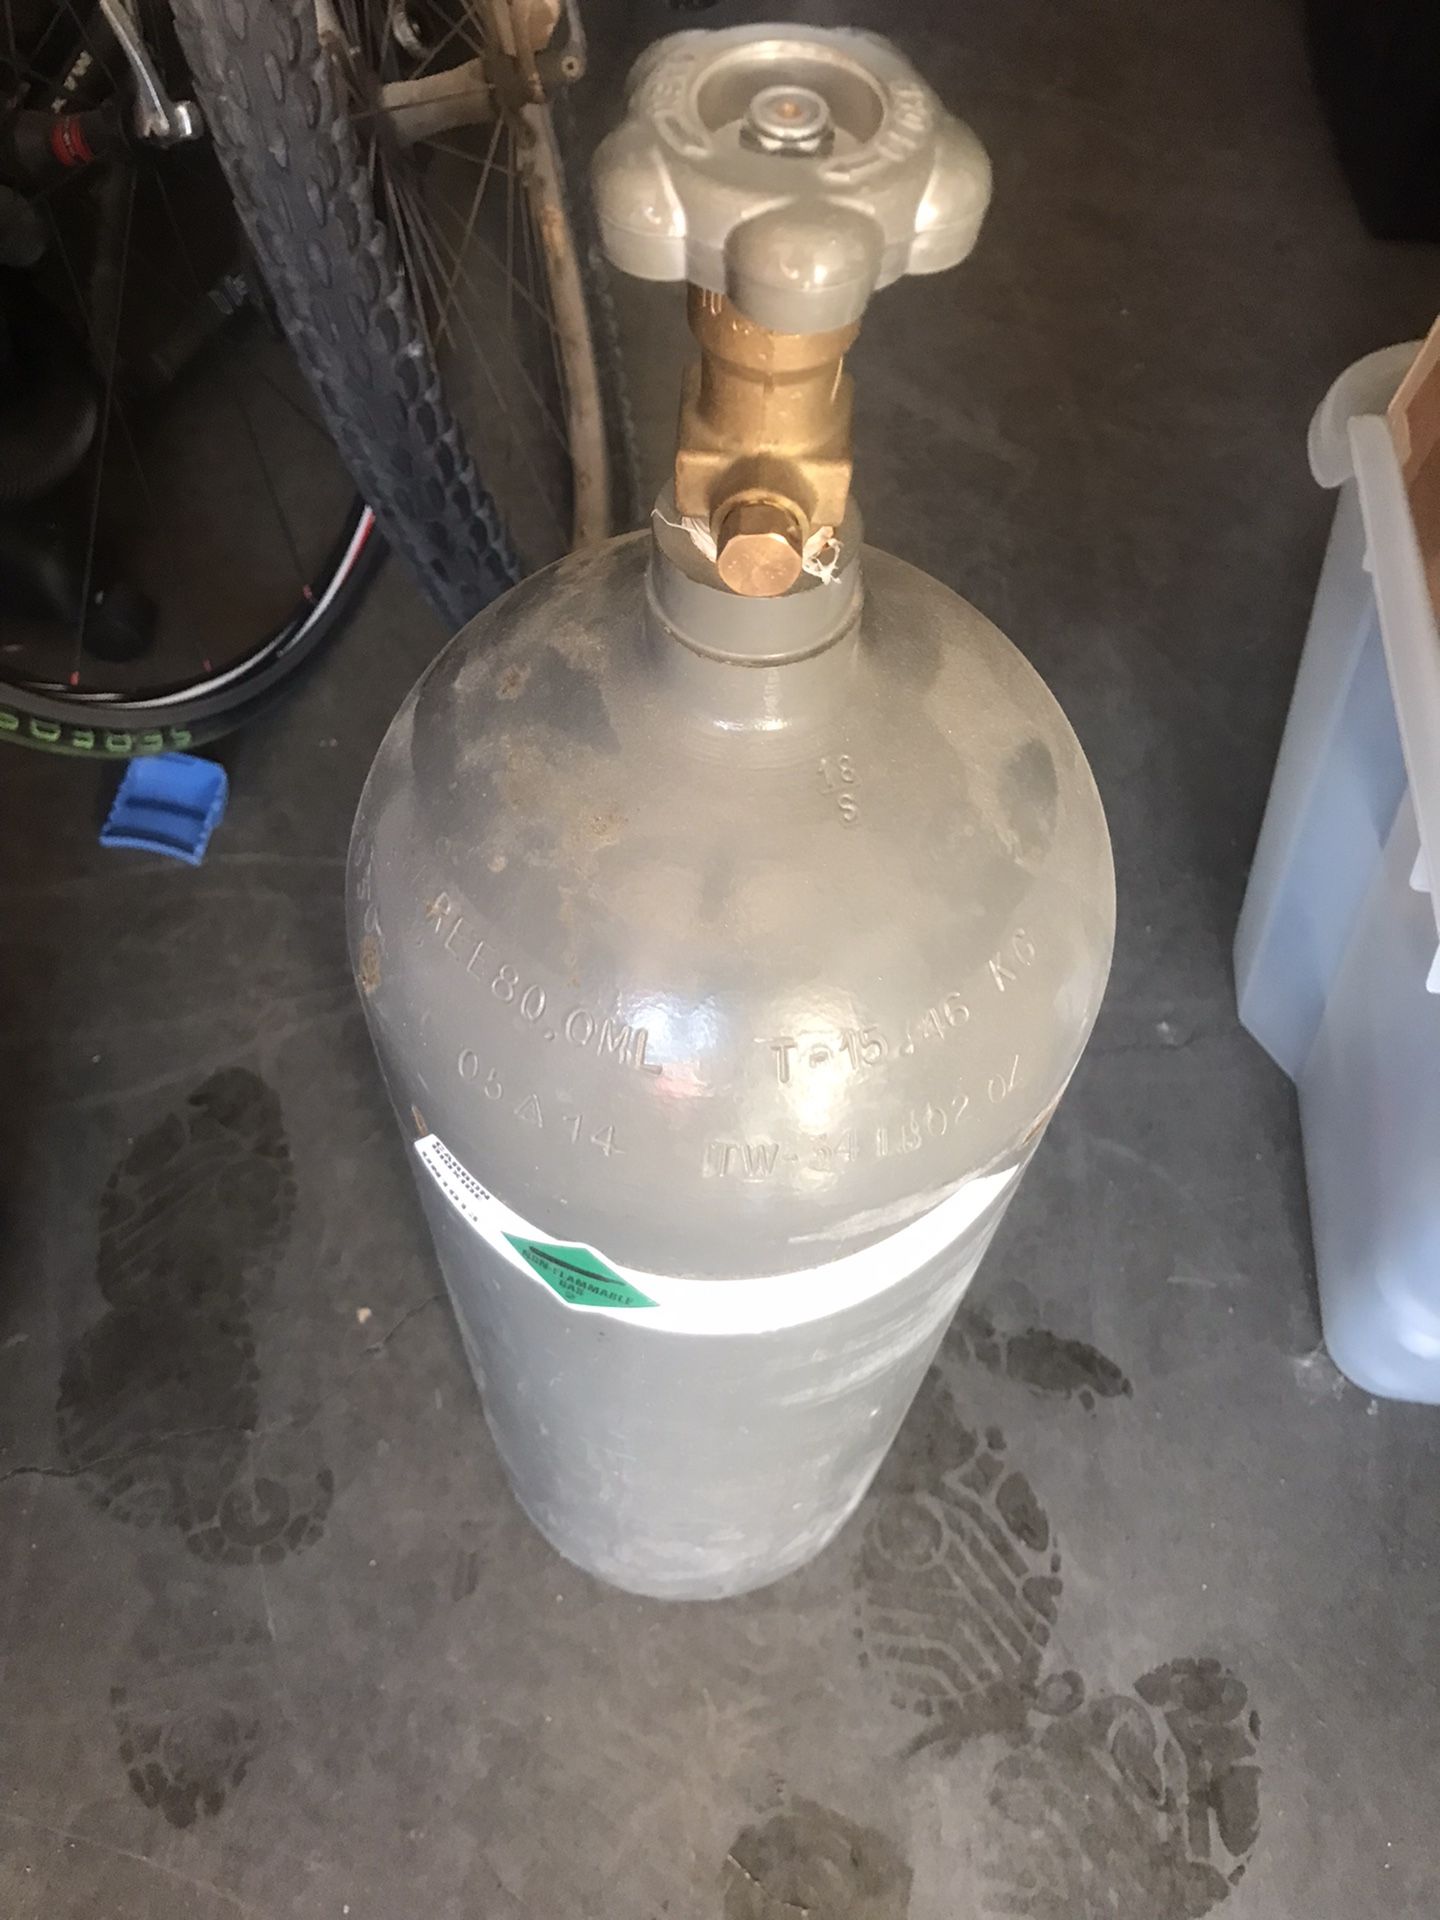 CO2 Carbon Dioxide Tank DOT Approved